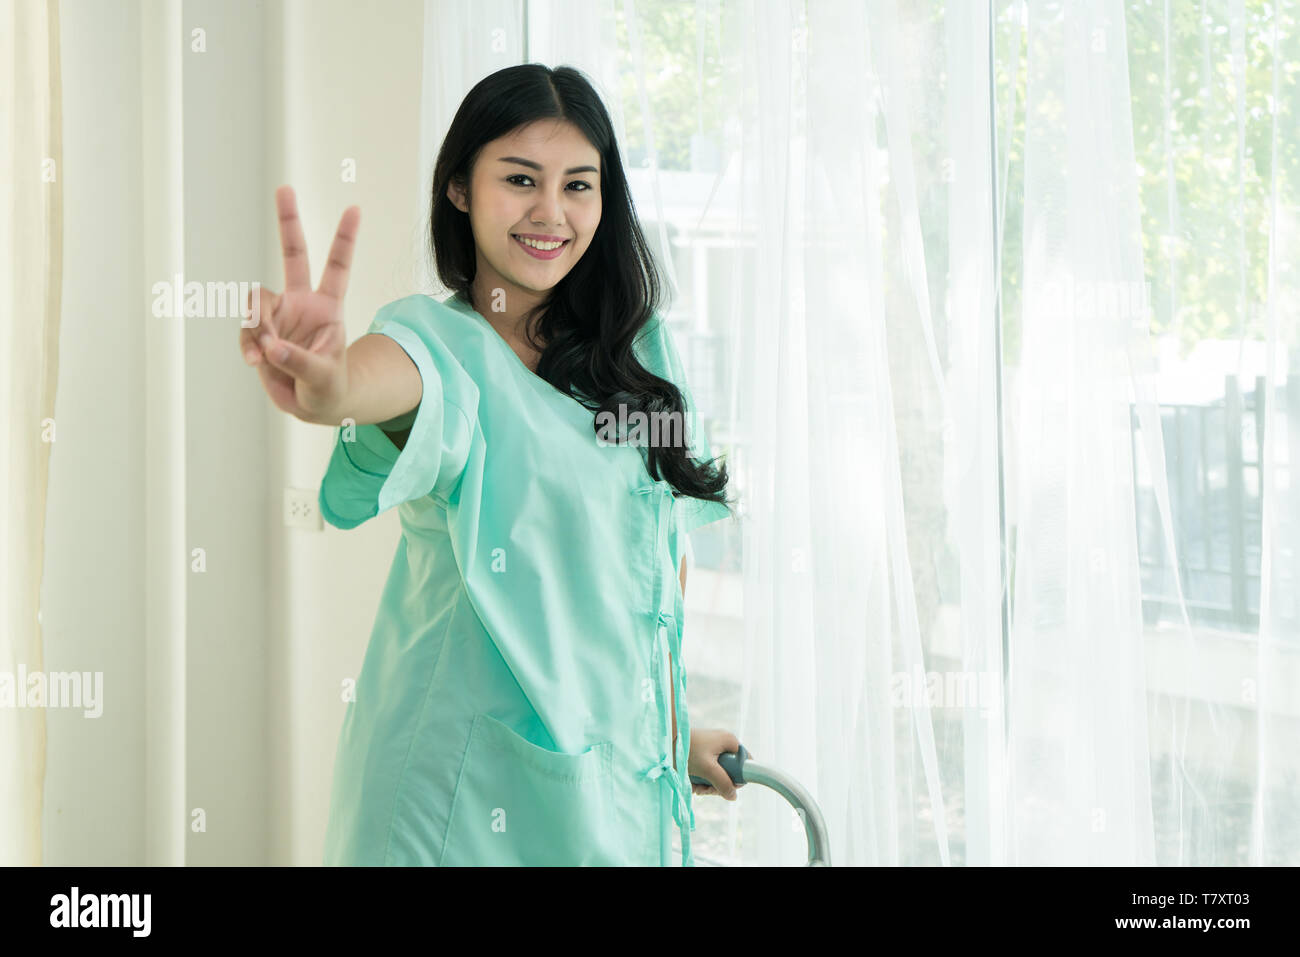 Young Asian patient woman standing at hospital room with walking stick showing victory sign for cheerful. Stock Photo